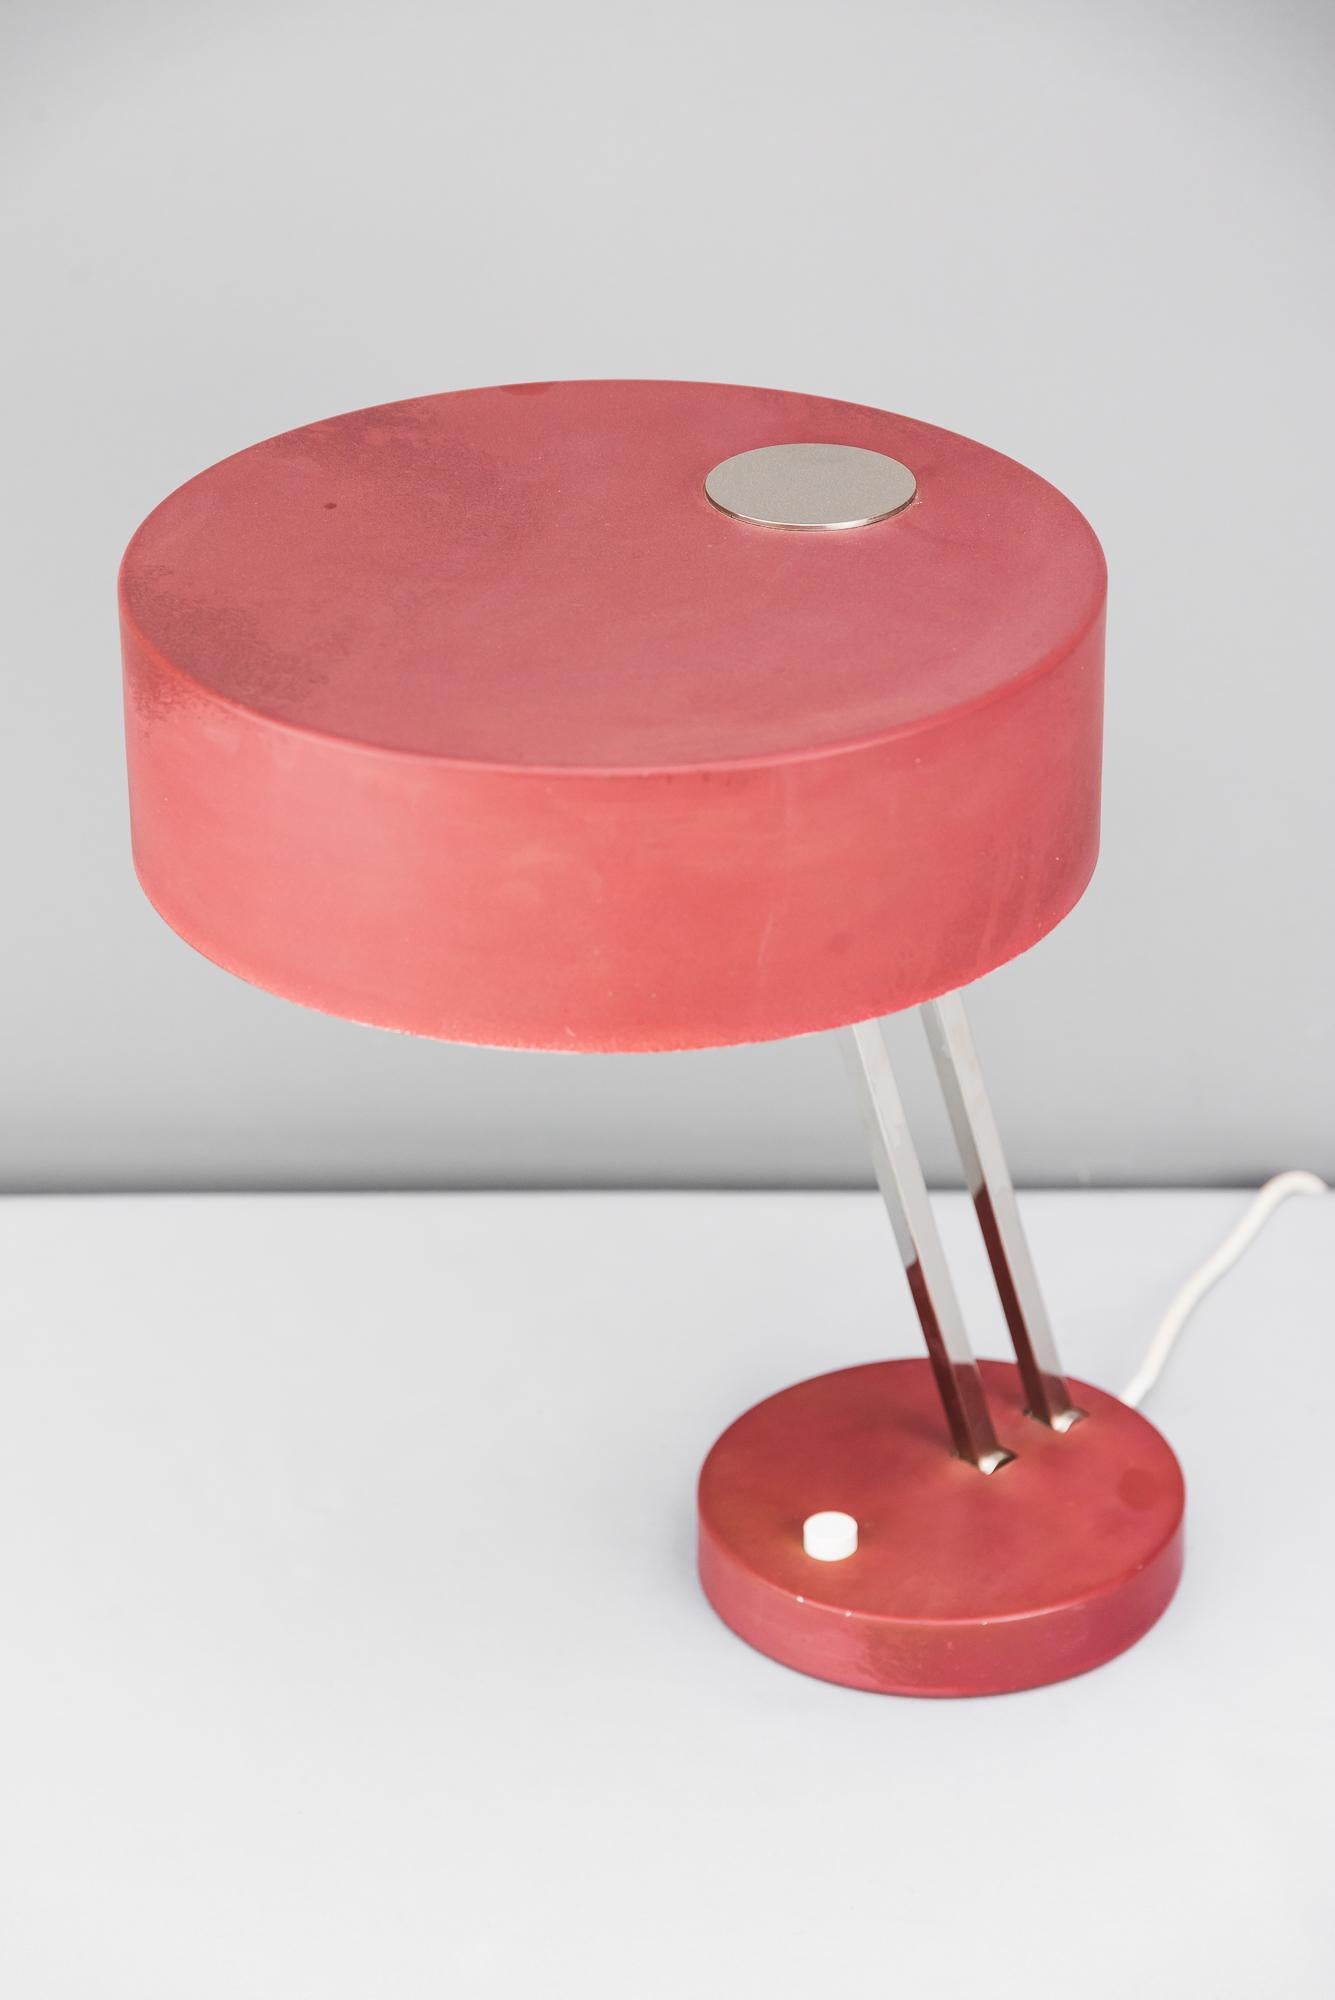 Swiveling table lamp, Italy, circa 1960s
Metal painted
Original condition
Measures: Deep inclined 35cm
Deep Normal 27cm.